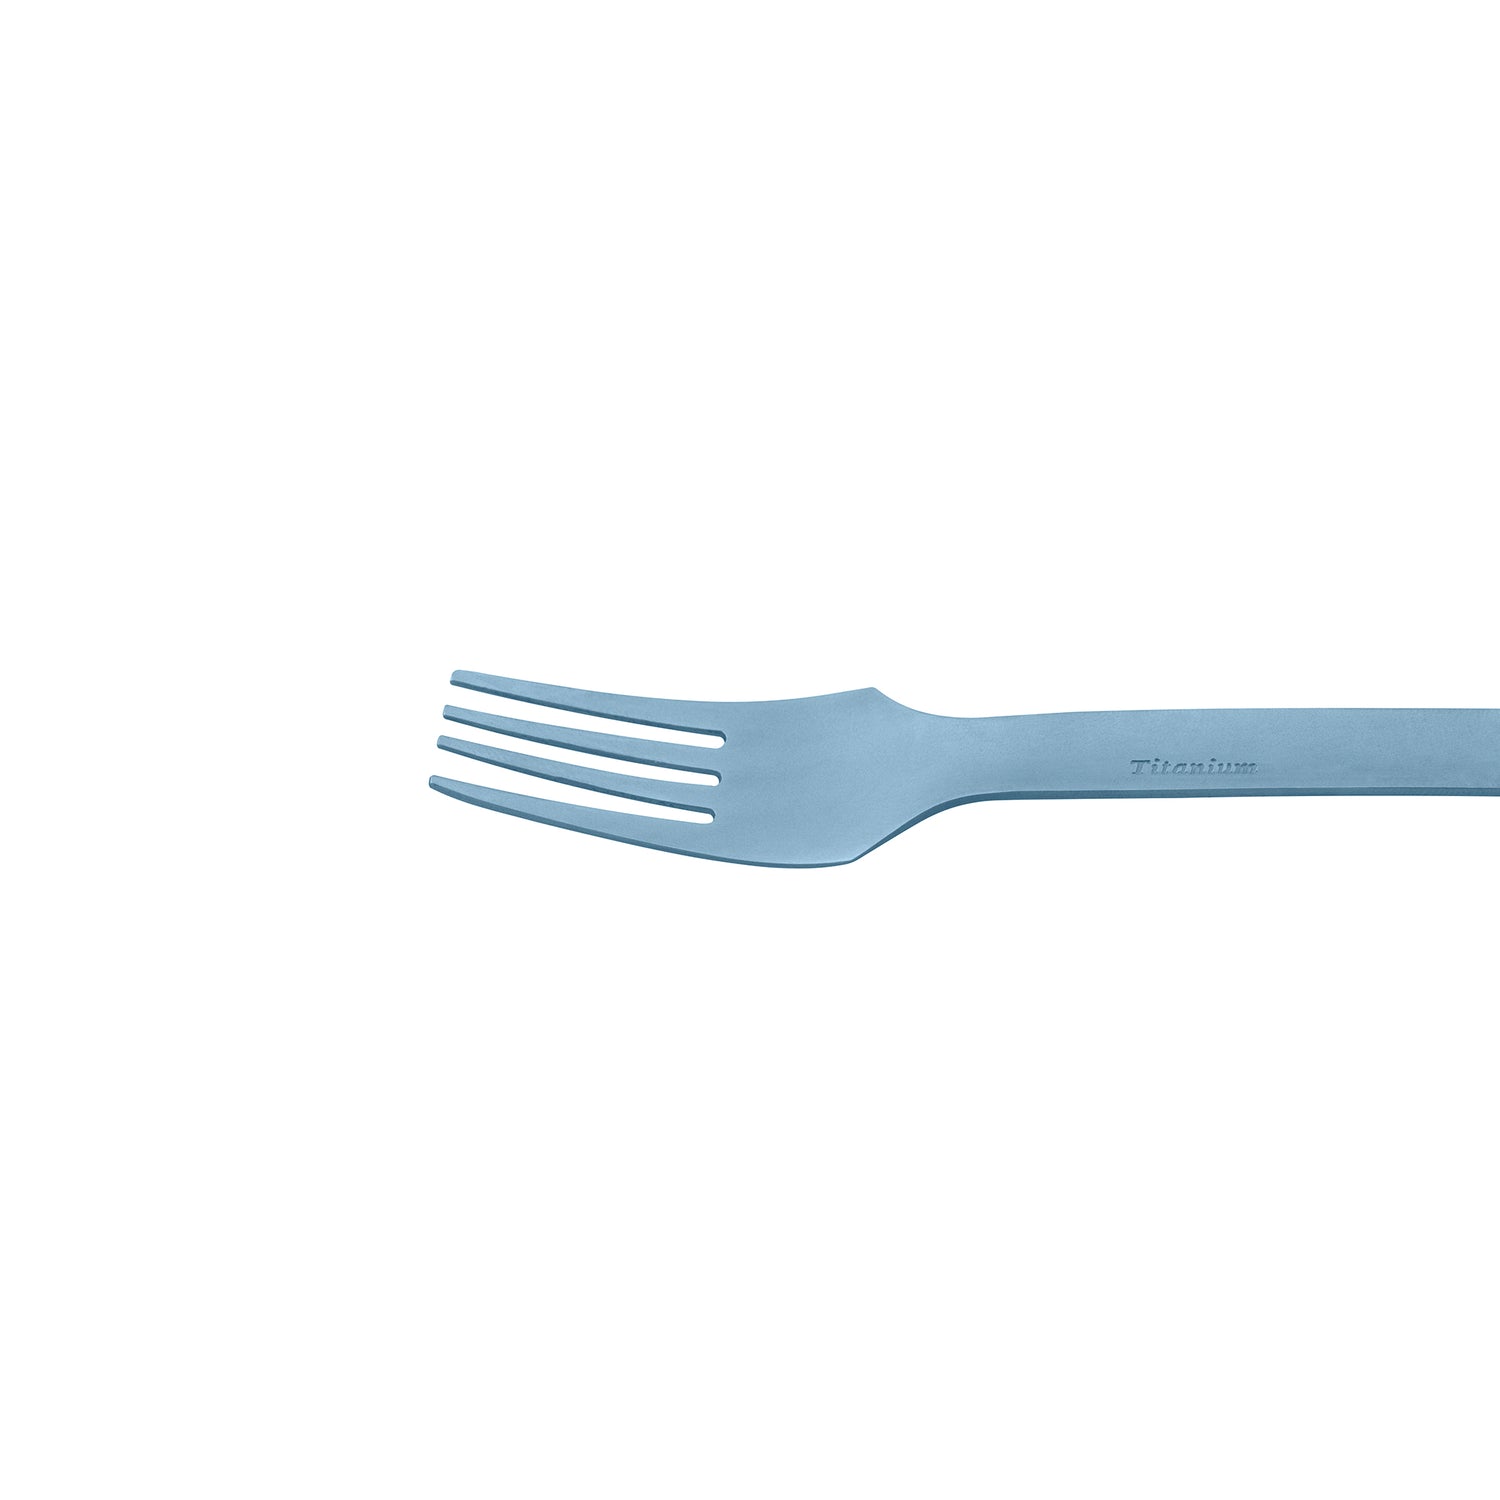 spoon and fork images